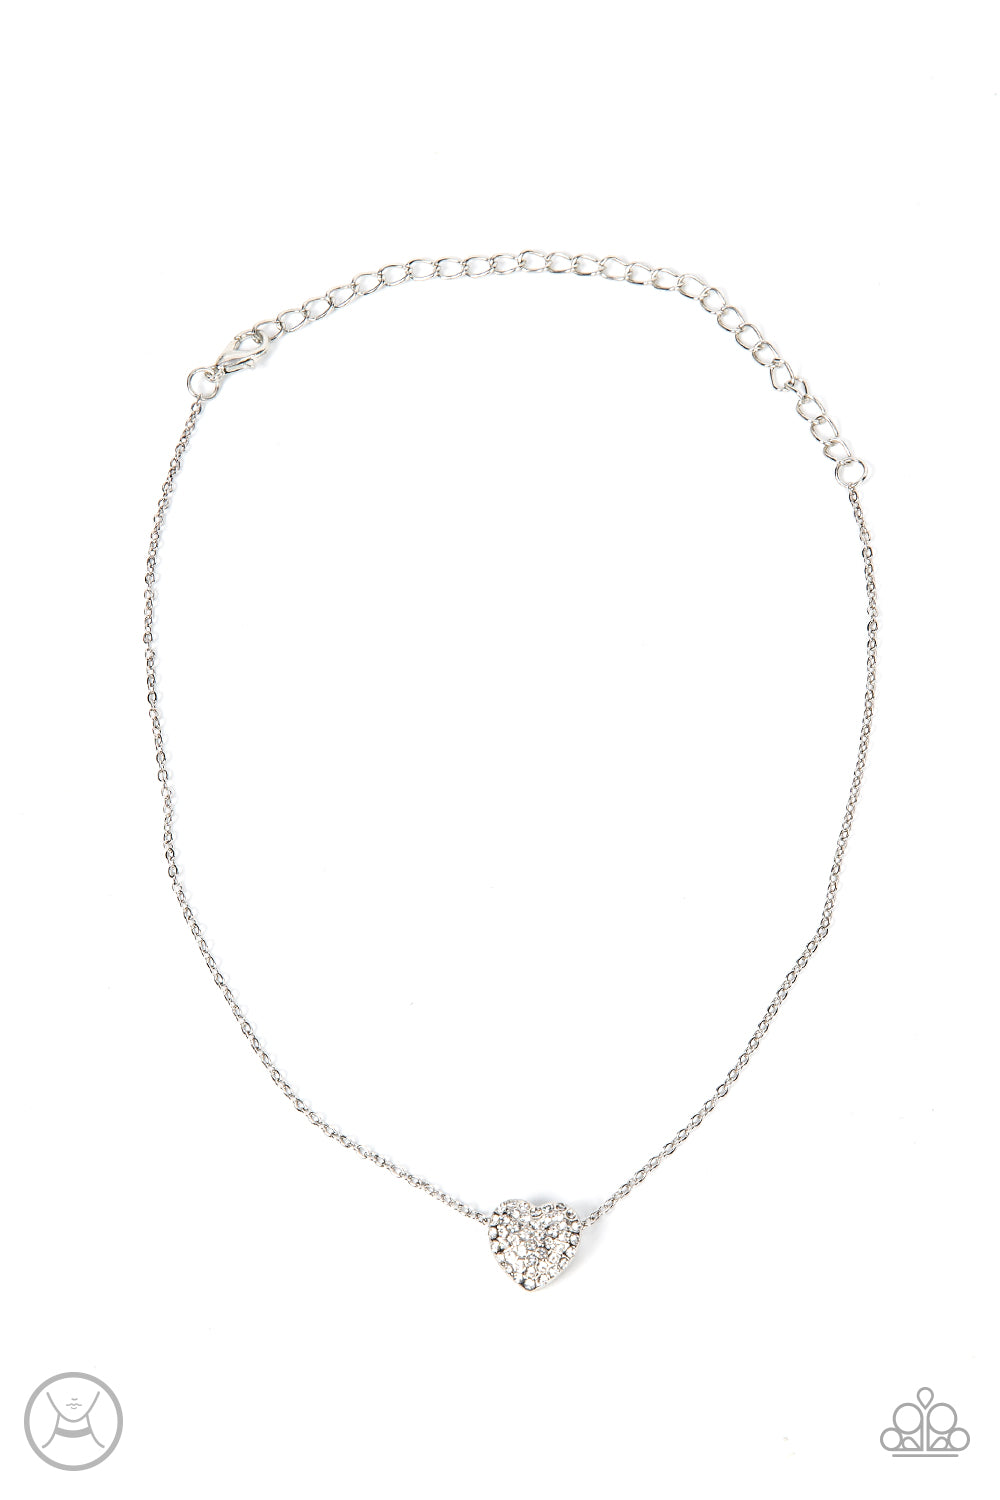 Twitterpated Twinkle White Choker Necklace - Paparazzi Accessories  Encrusted in glassy white rhinestones, a dainty heart frame sparkles along a dainty silver chain around the neck for a flirty finesse. Features an adjustable clasp closure.  Sold as one individual choker necklace. Includes one pair of matching earrings.